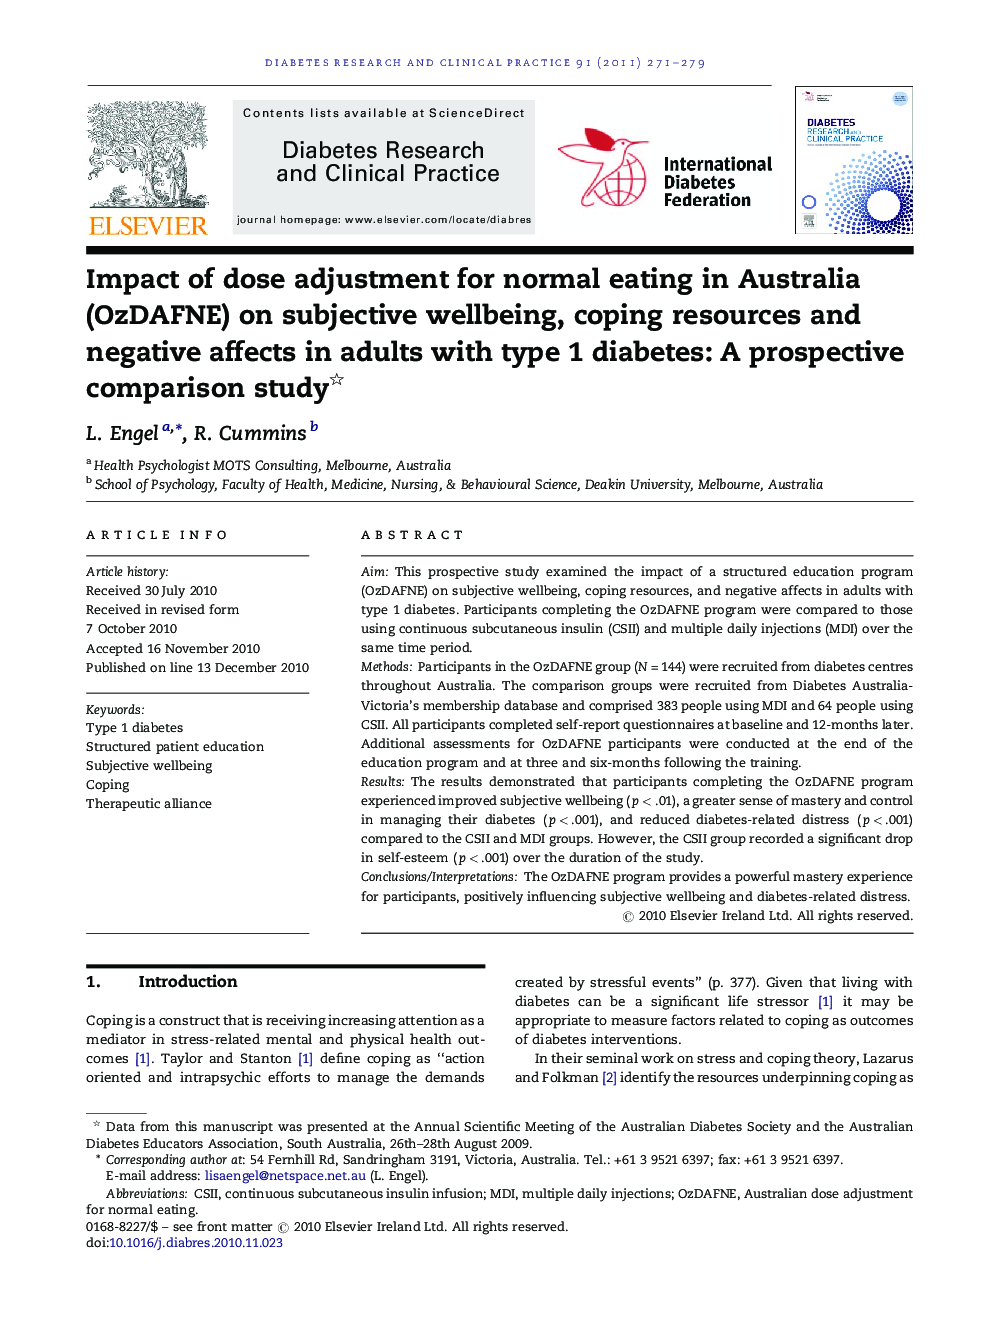 Impact of dose adjustment for normal eating in Australia (OzDAFNE) on subjective wellbeing, coping resources and negative affects in adults with type 1 diabetes: A prospective comparison study